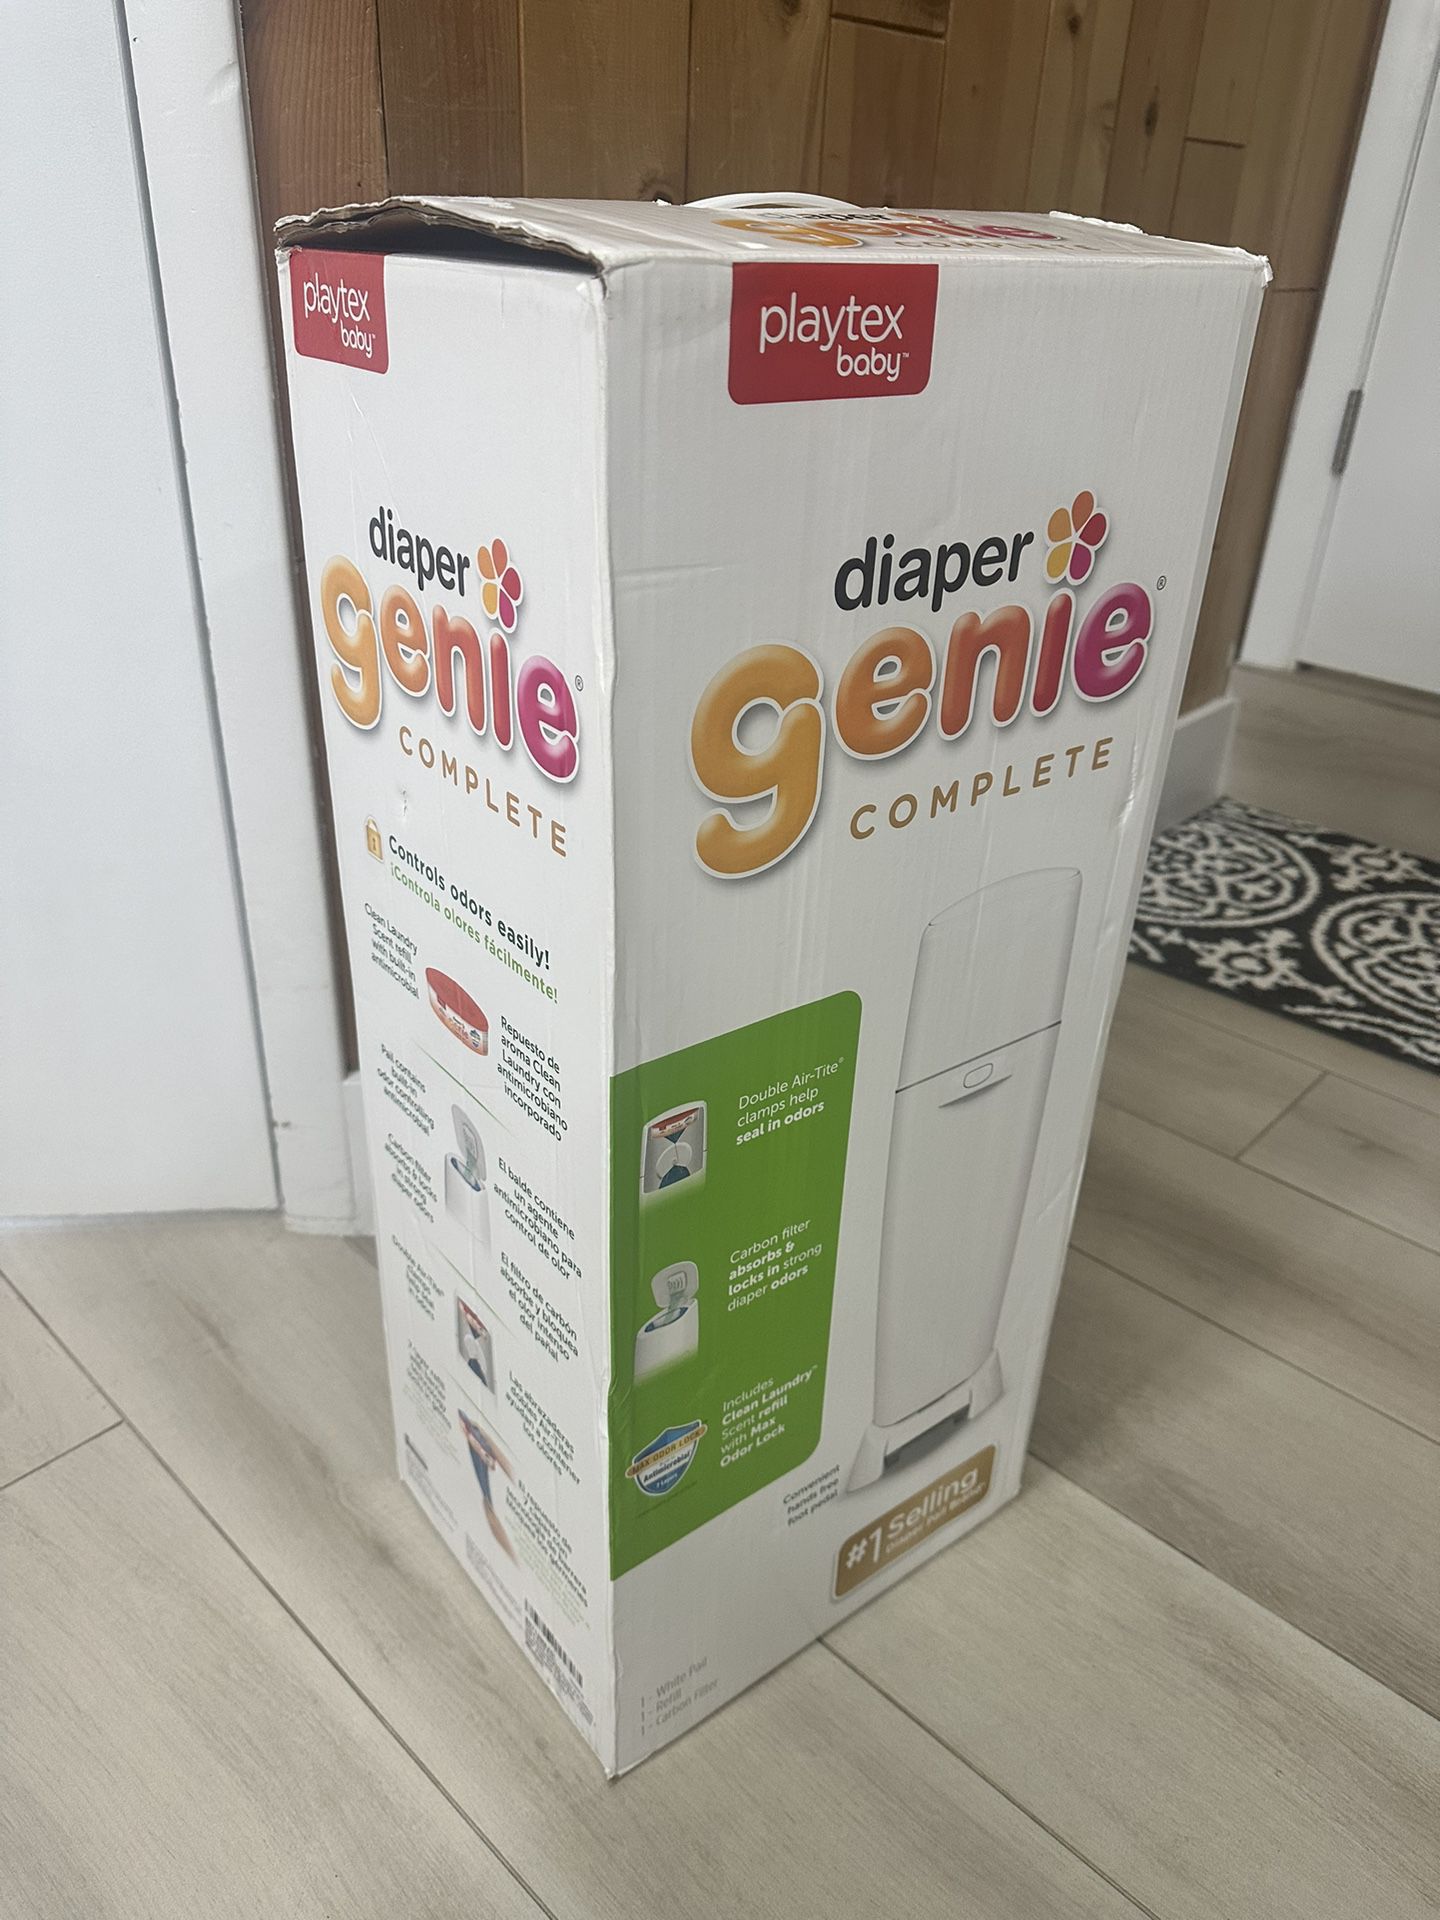 NEW IN BOX: Diaper Genie Complete Diaper Pail with 1 refill